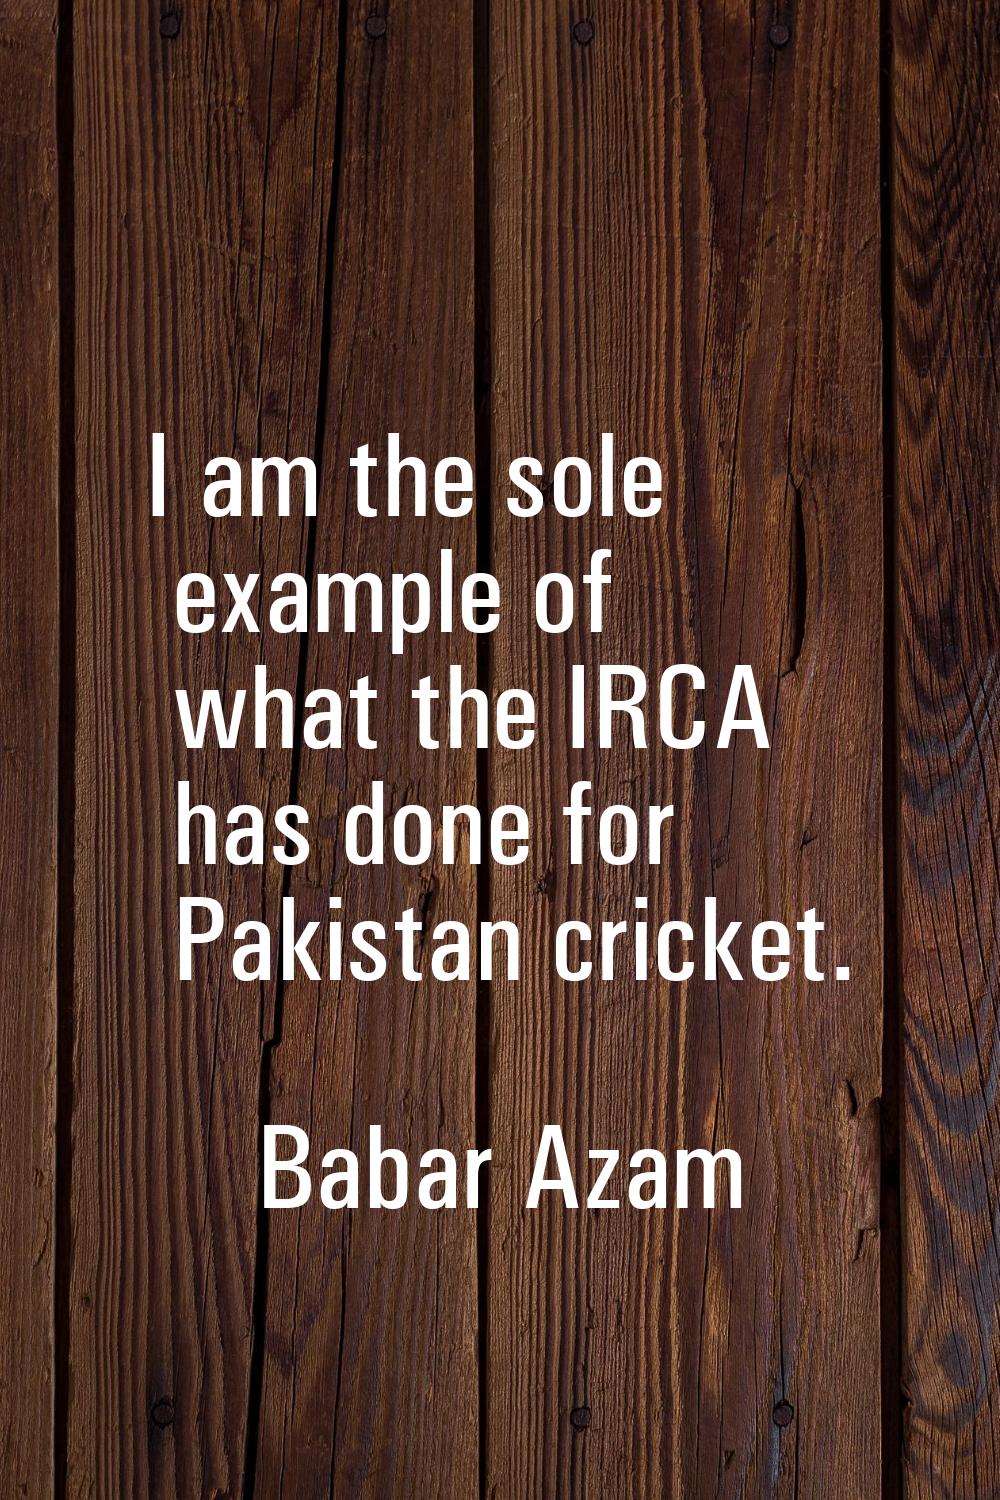 I am the sole example of what the IRCA has done for Pakistan cricket.